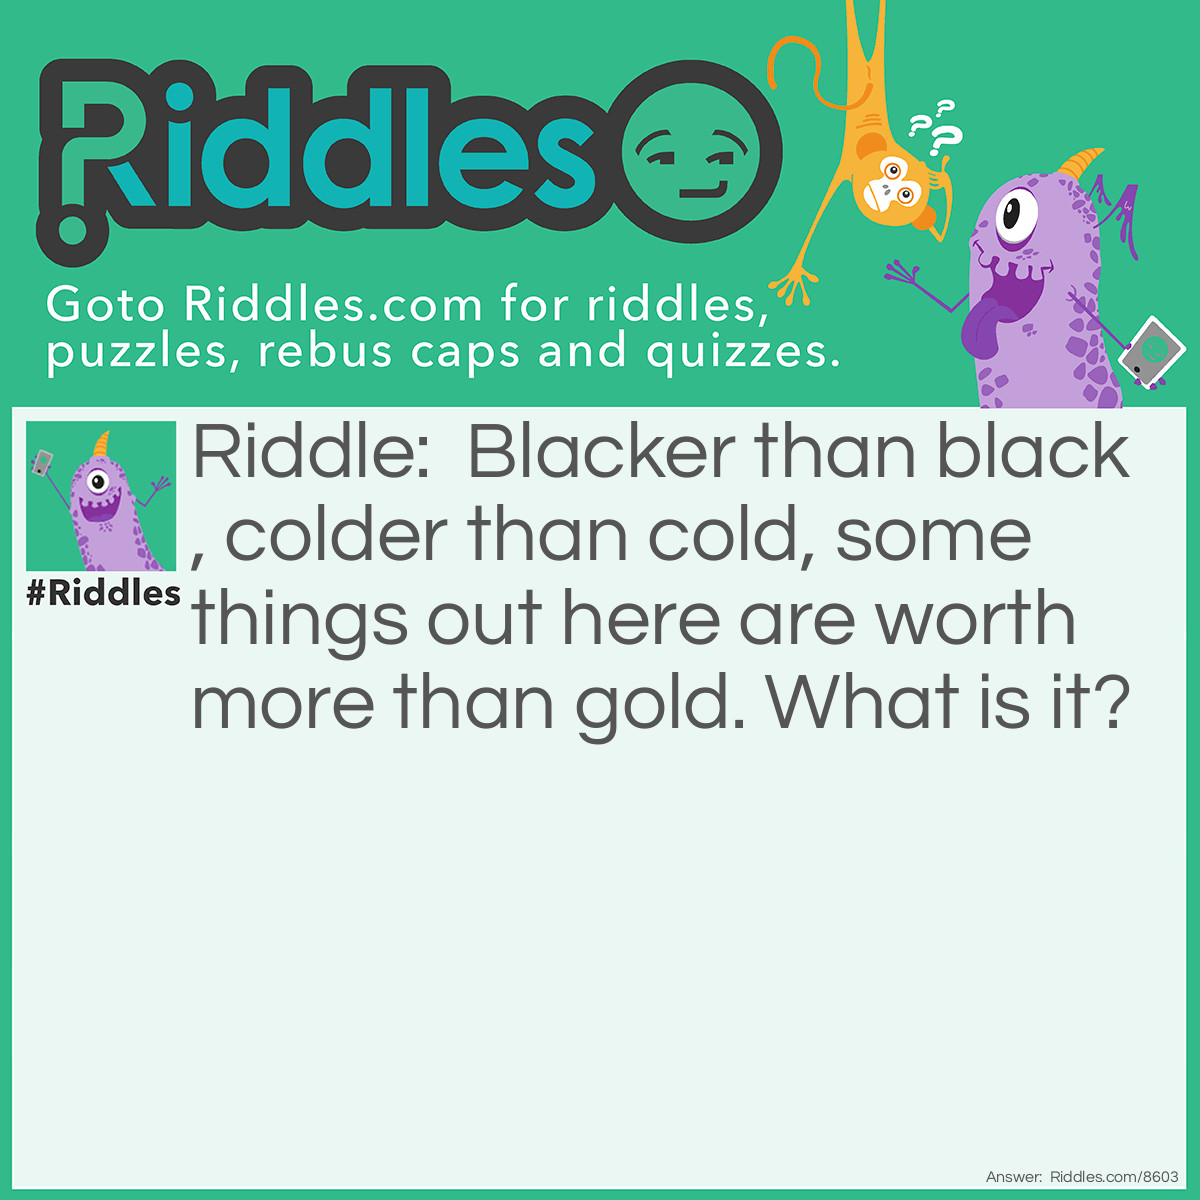 Riddle: Blacker than black, colder than cold, some things out here are worth more than gold. What is it? Answer: Space.